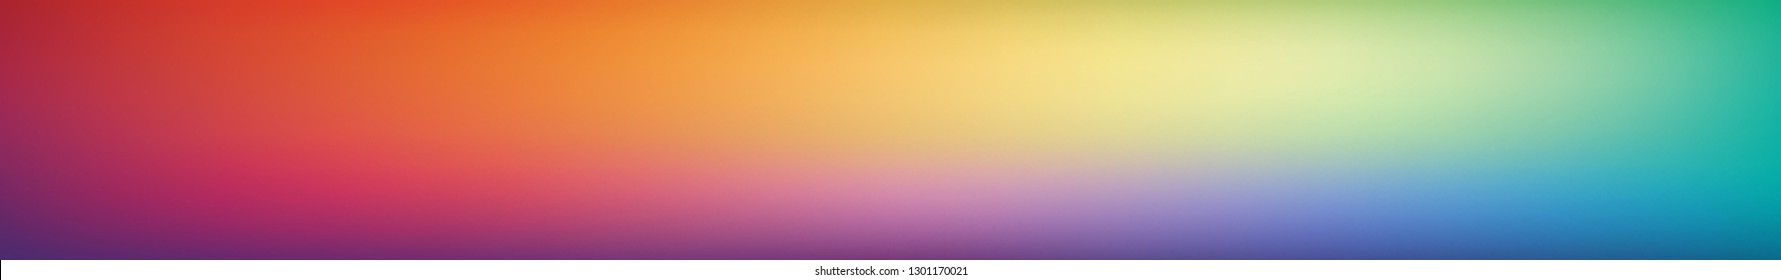 Panoramic smooth and blurry colorful gradient mesh background.  Horizontal view for a glass panels - skinali. Bright rainbow colors. Easy editable soft colored vector template. Premium quality.